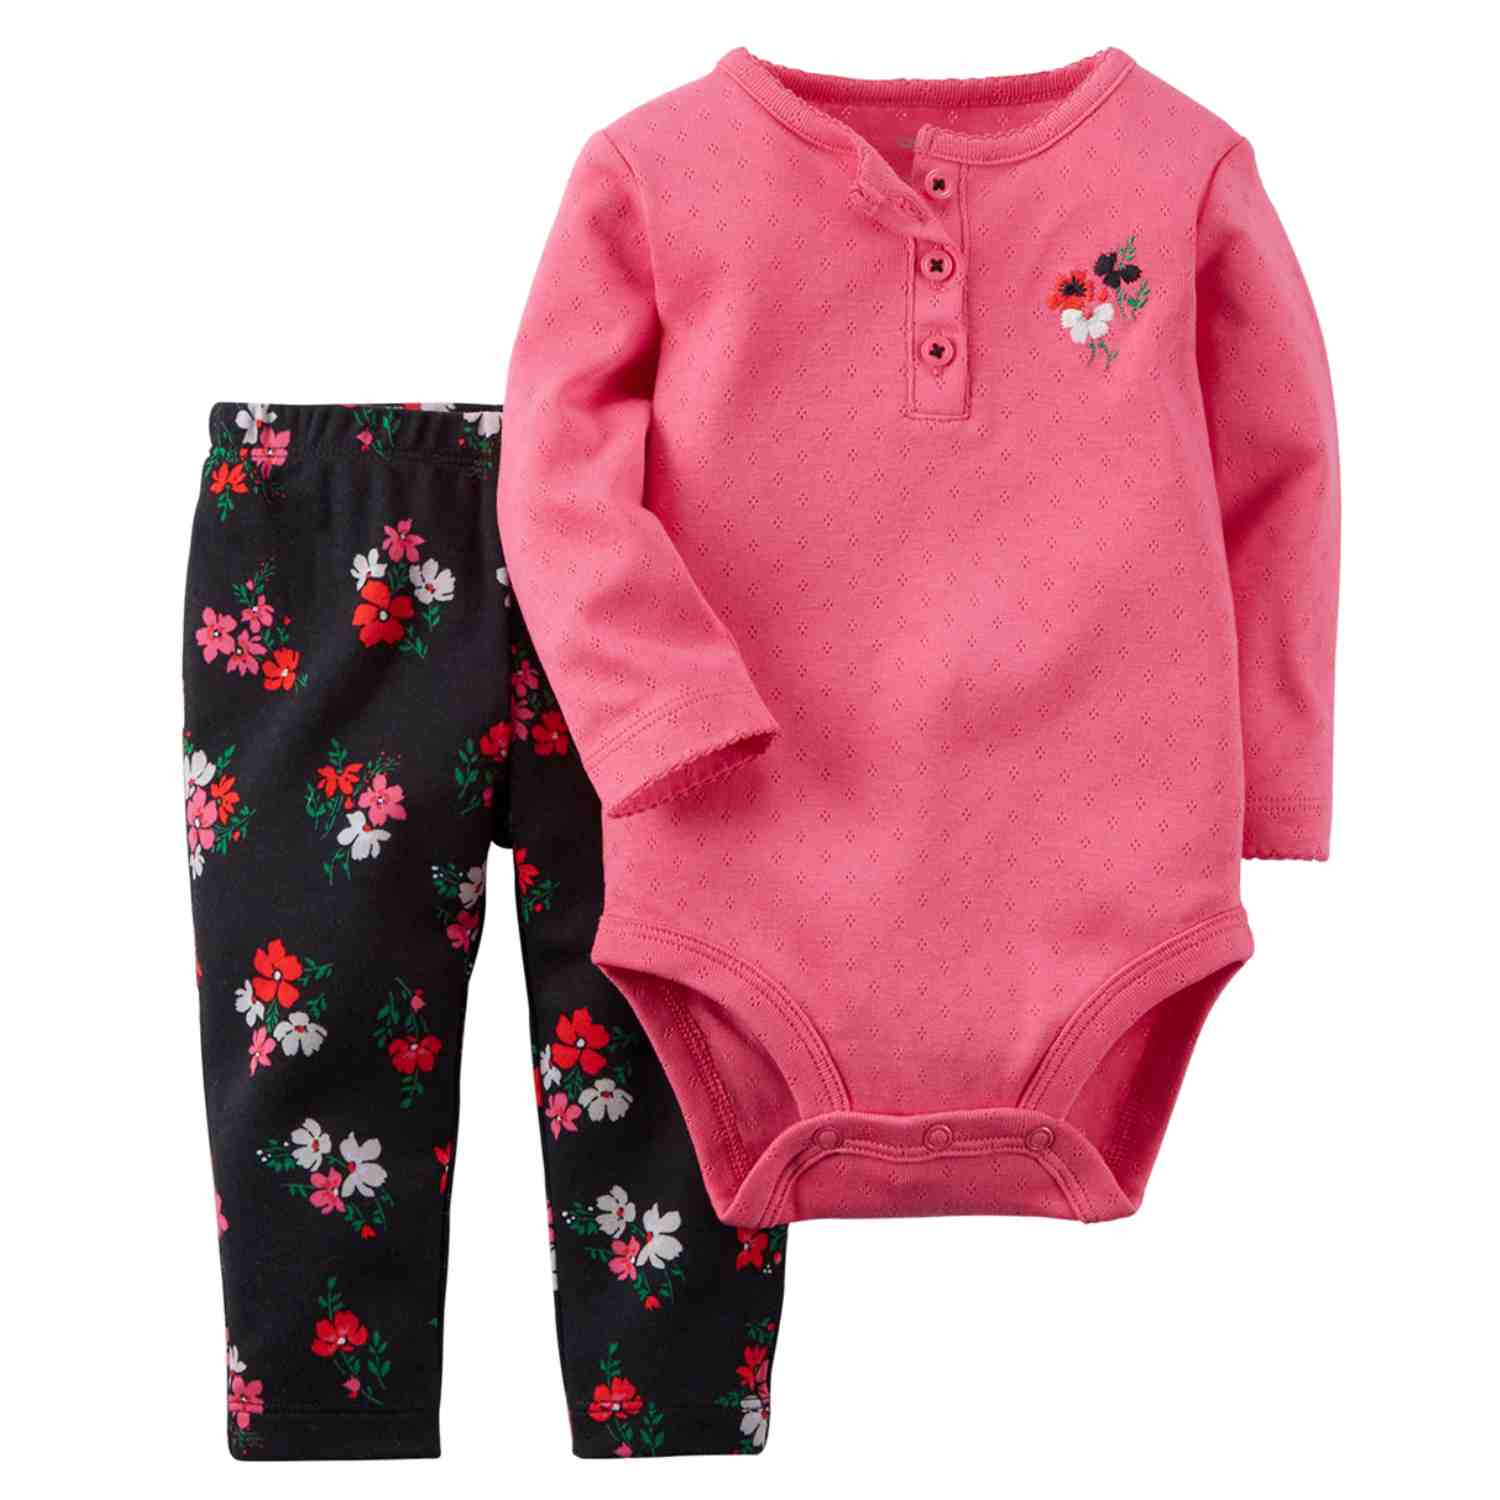 Carter's Carters Infant Girl 2 PC Flower Outfit Pink Bodysuit Creeper Floral Leggings